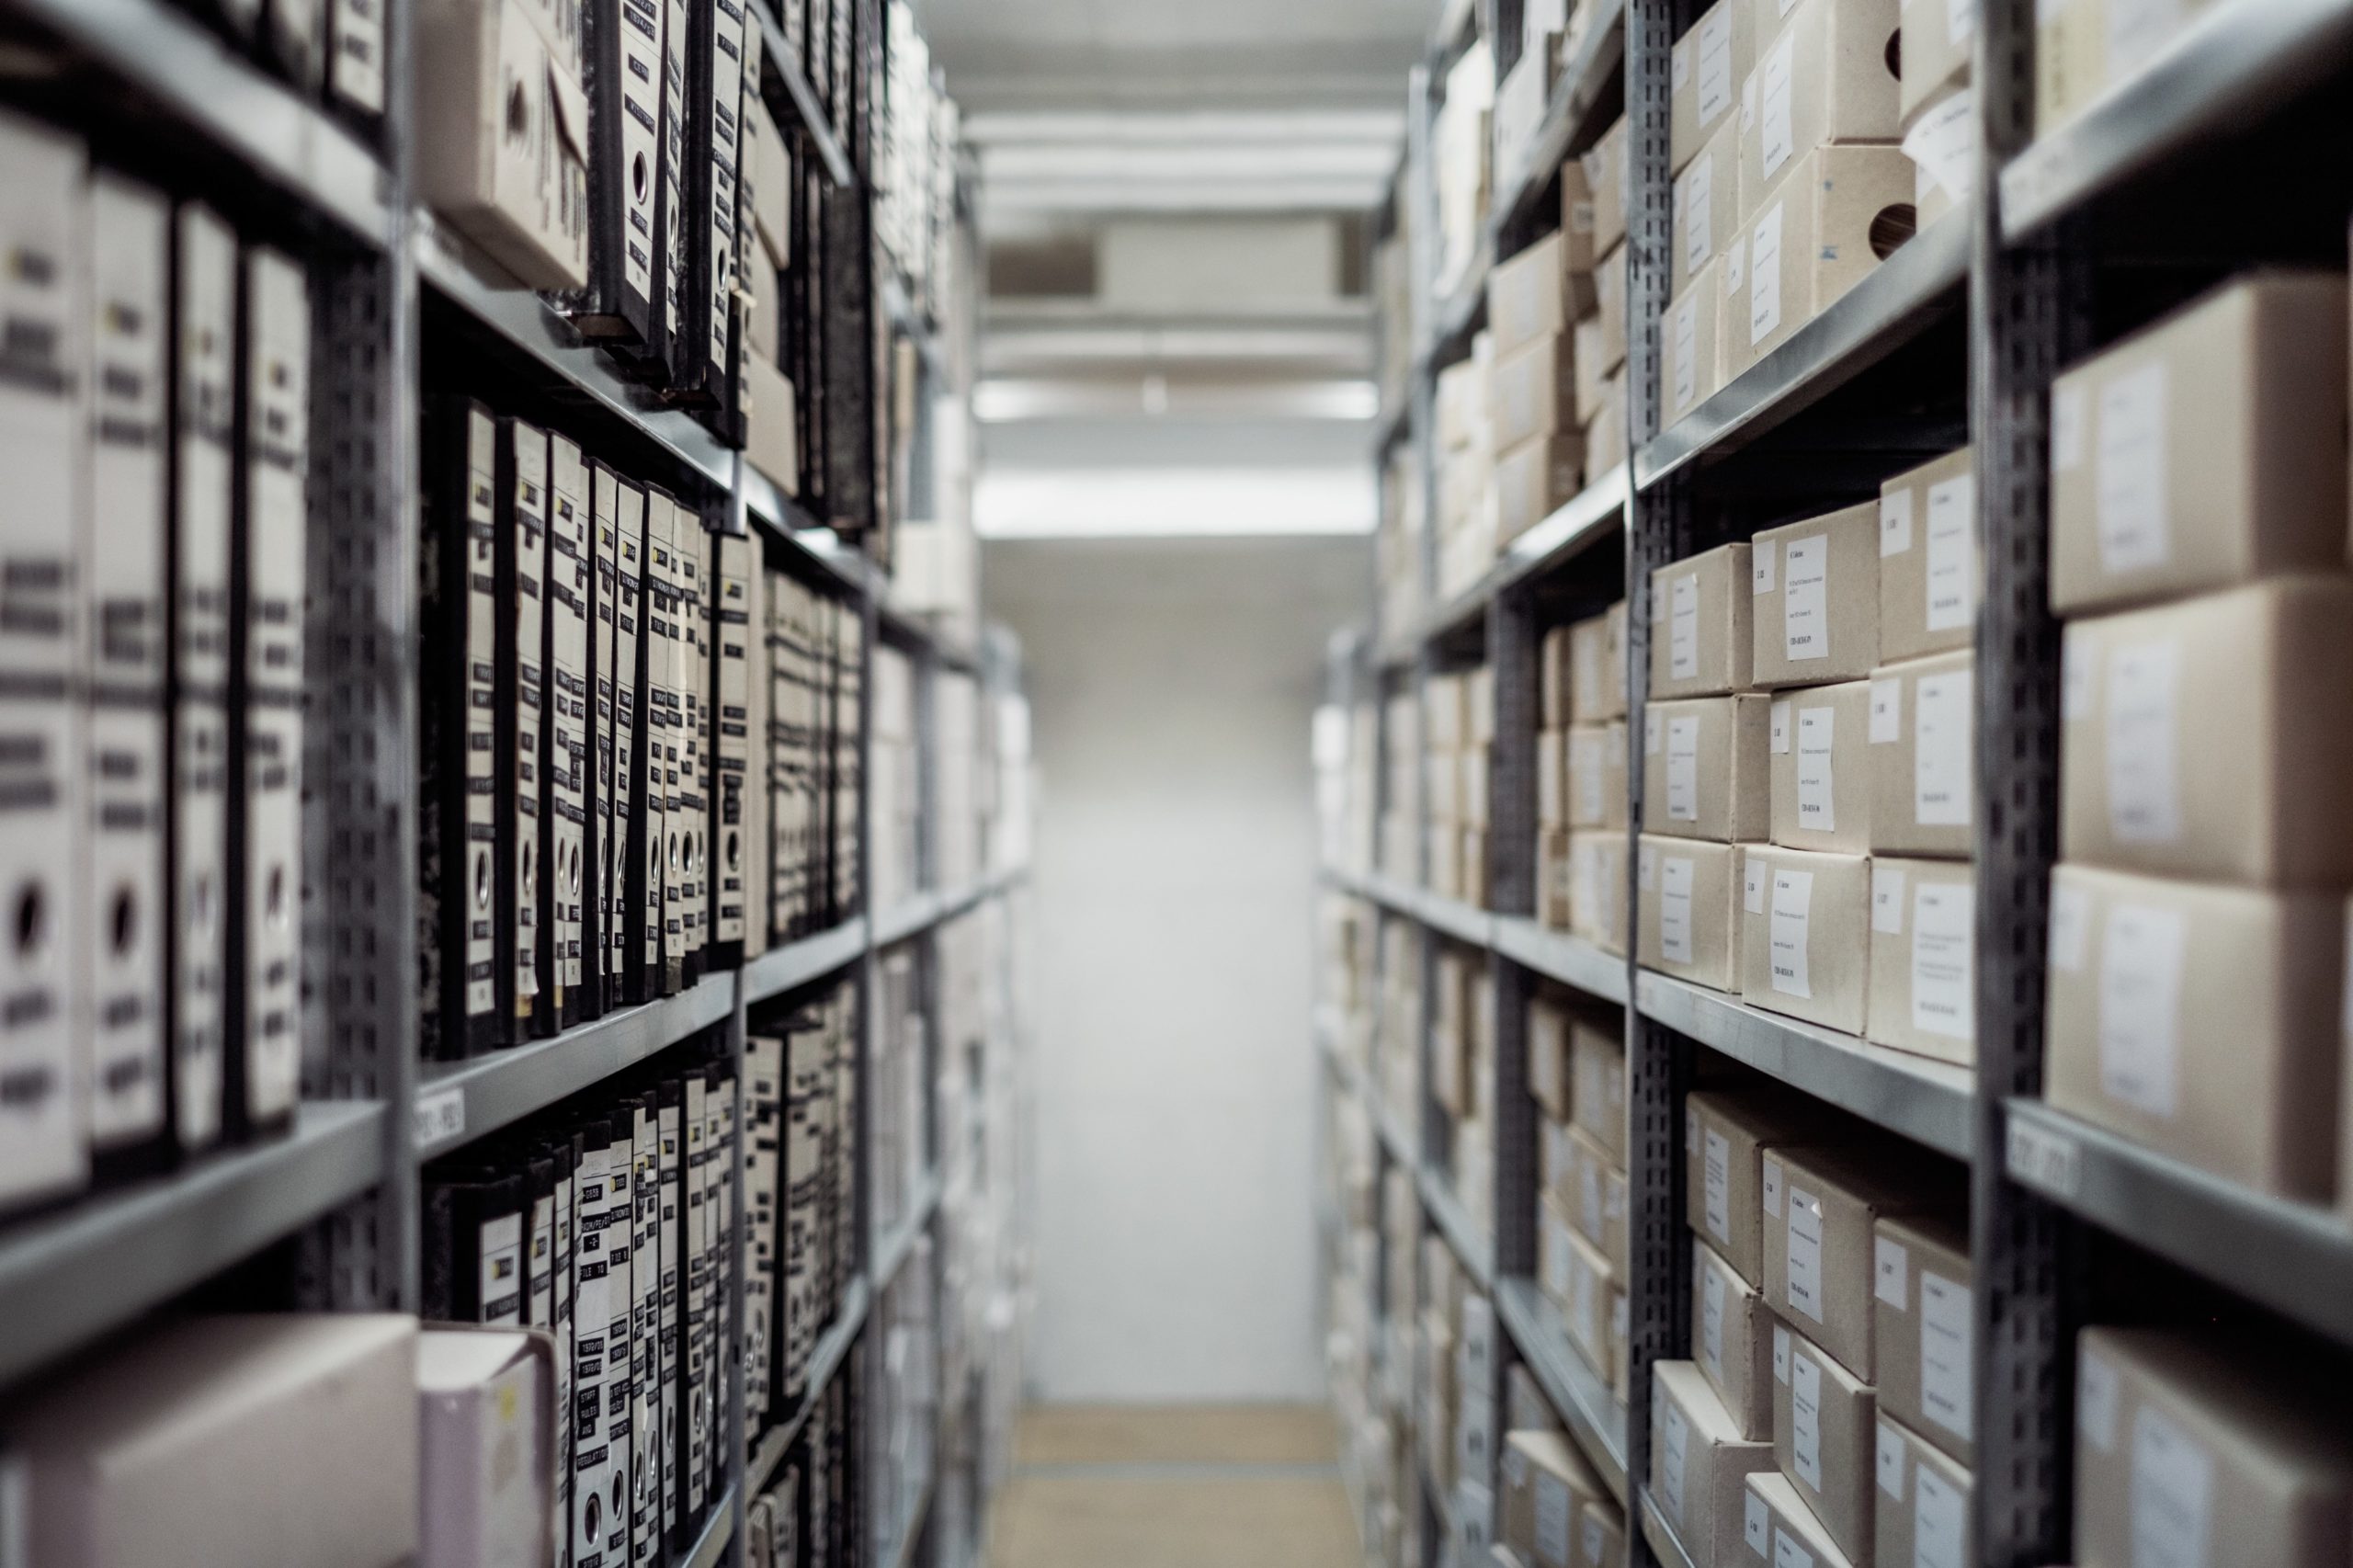 Photo of documents in a lane of shelves in an archive by Samuel Zeller/Unsplash